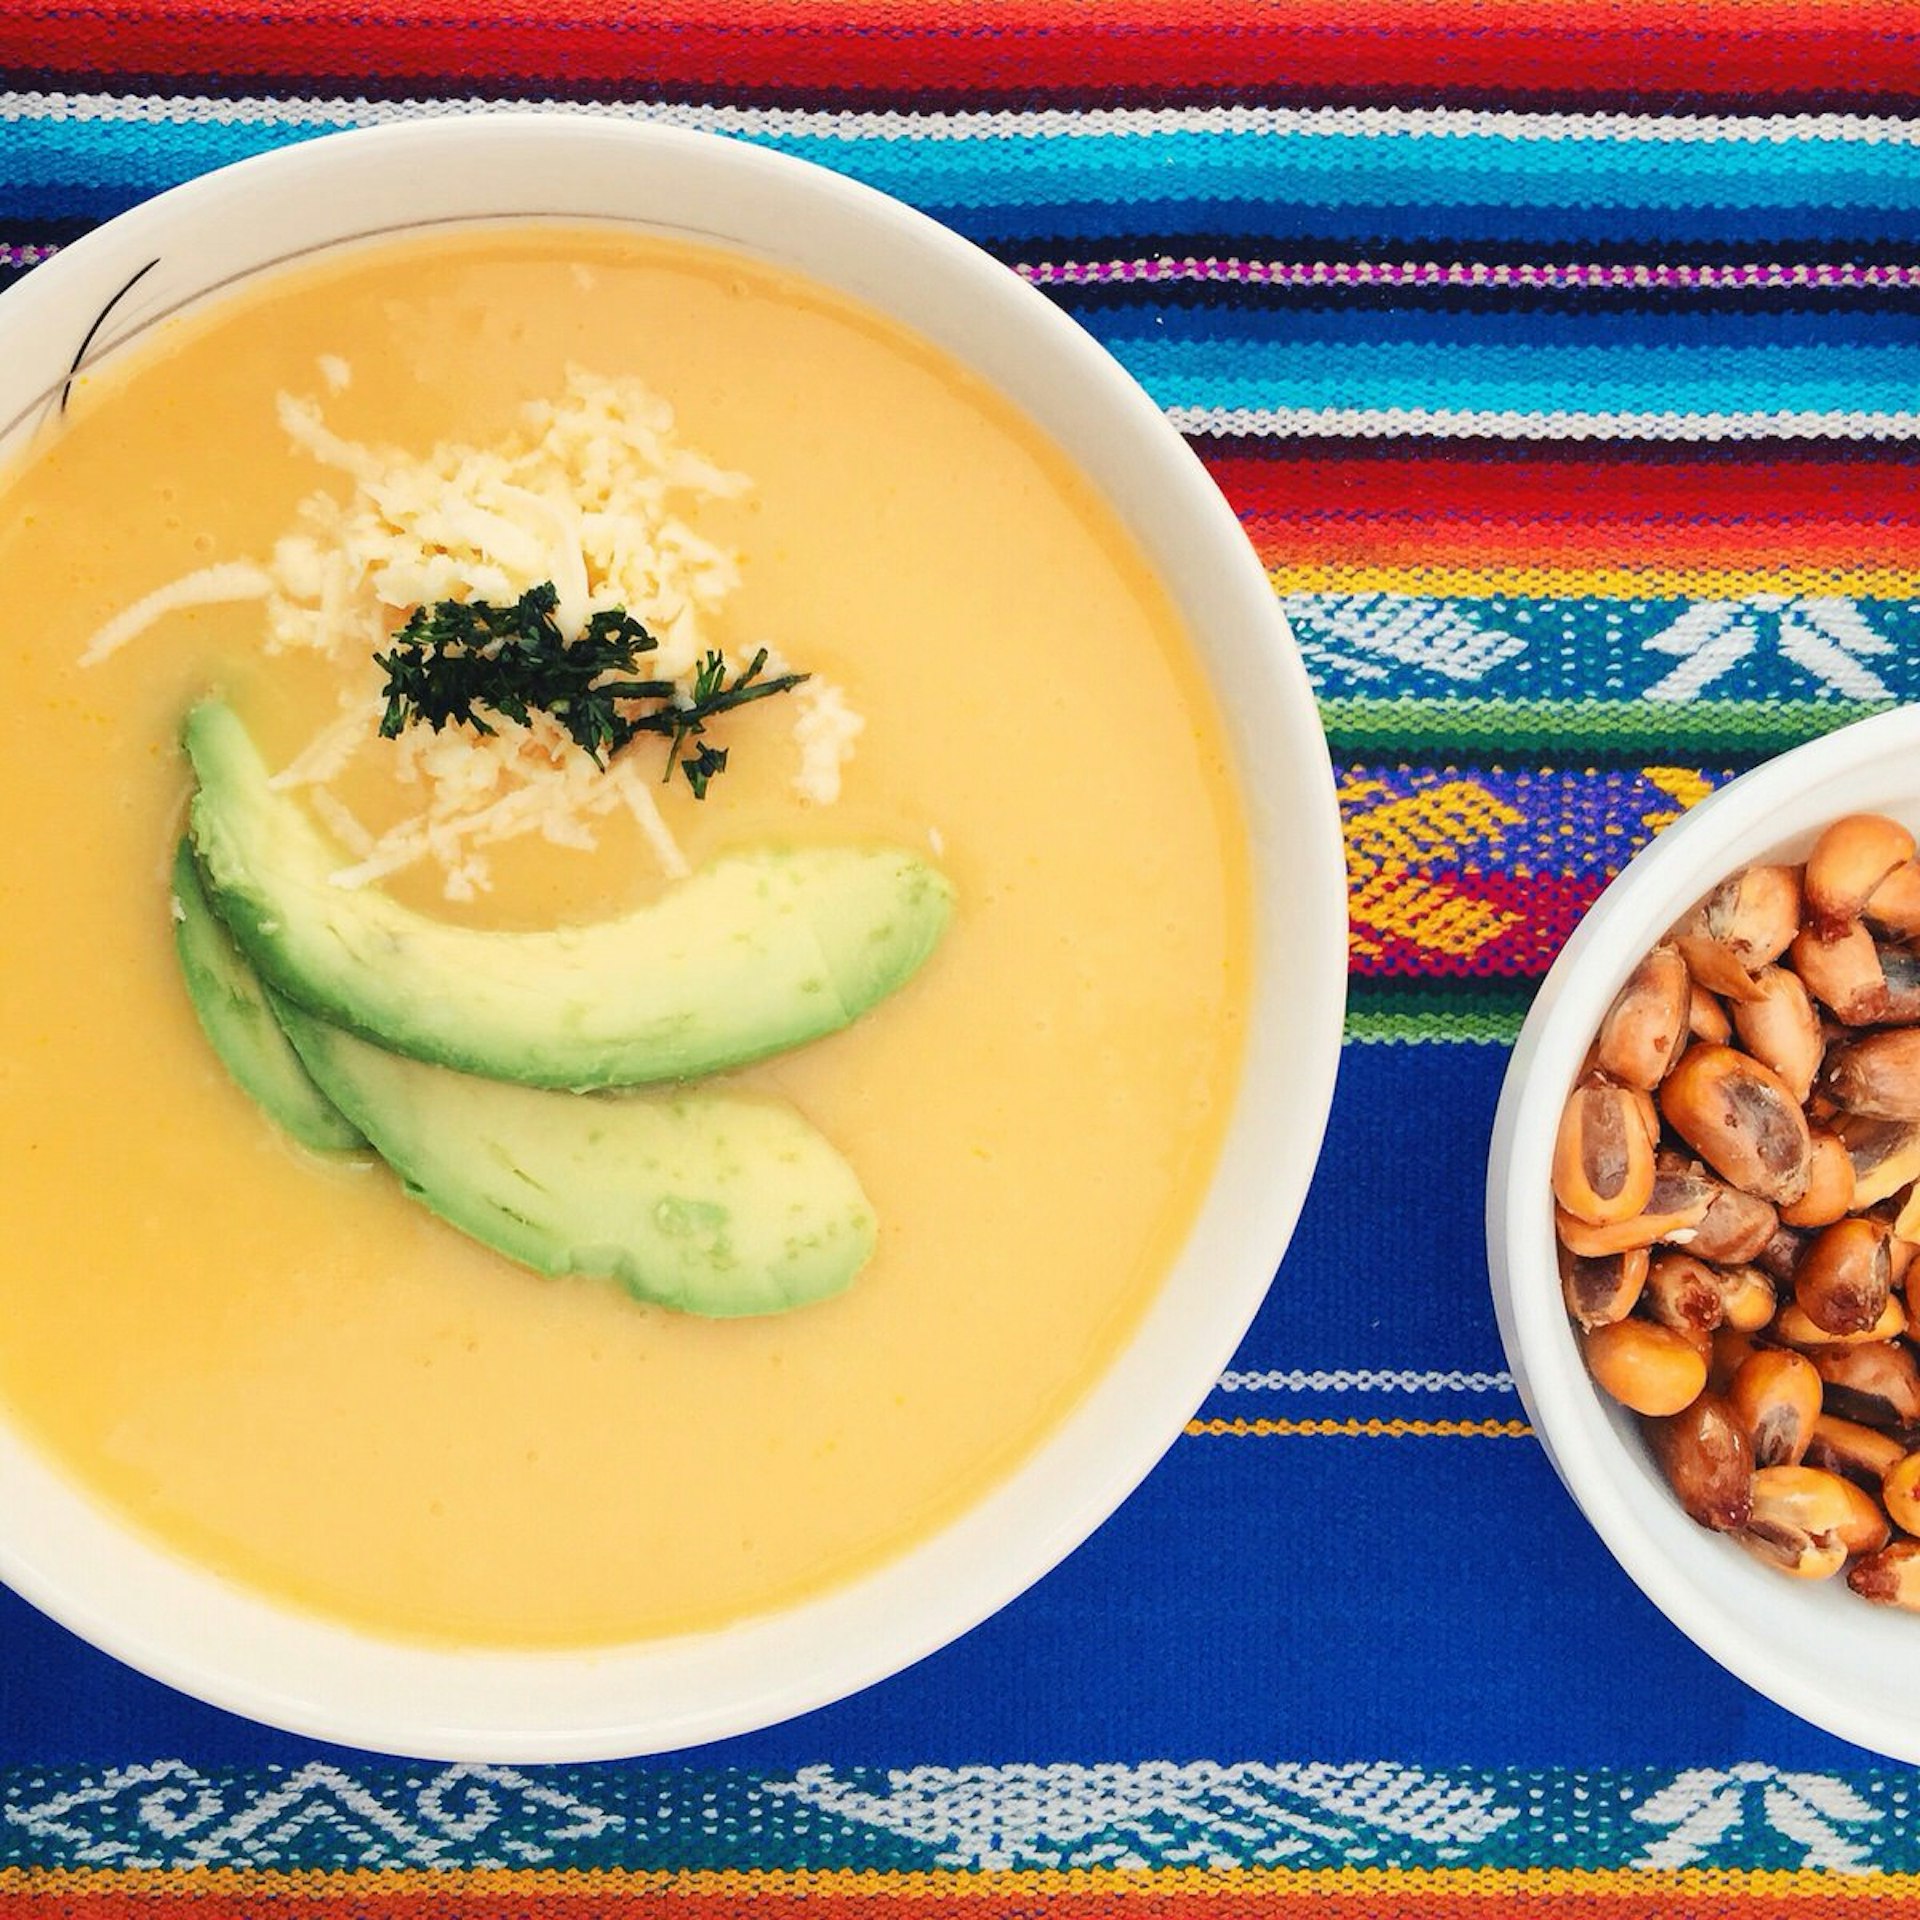 When capturing food close-ups, sometimes less is more; cropping and colour create visual harmony over a bowl of soup in Ecuador's Cotopaxi National Park © MaSovaida Morgan / Lonely Planet